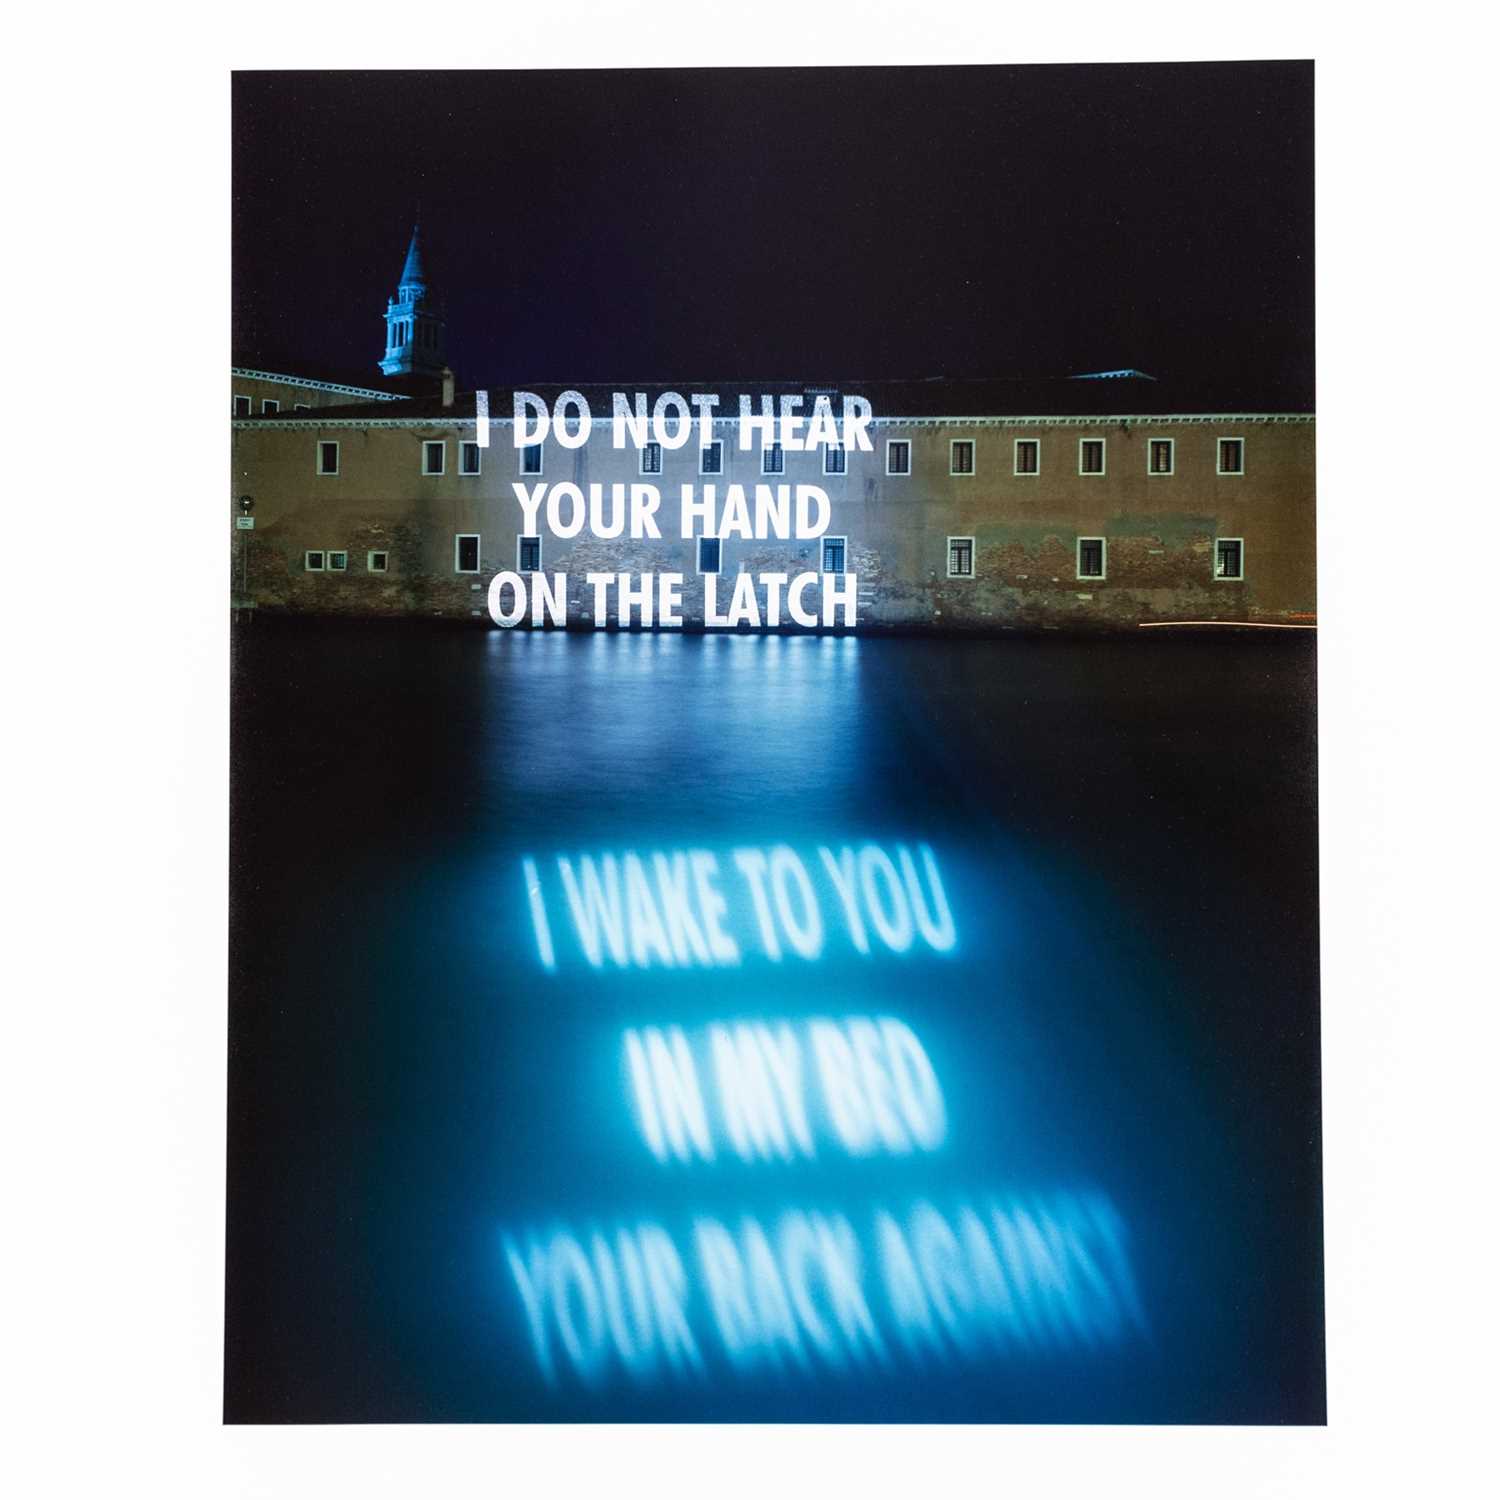 Lot 14 - Jenny Holzer (American 1950-Jenny Holzer (American 1950-), I Do Not Hear Your Hand, 2001